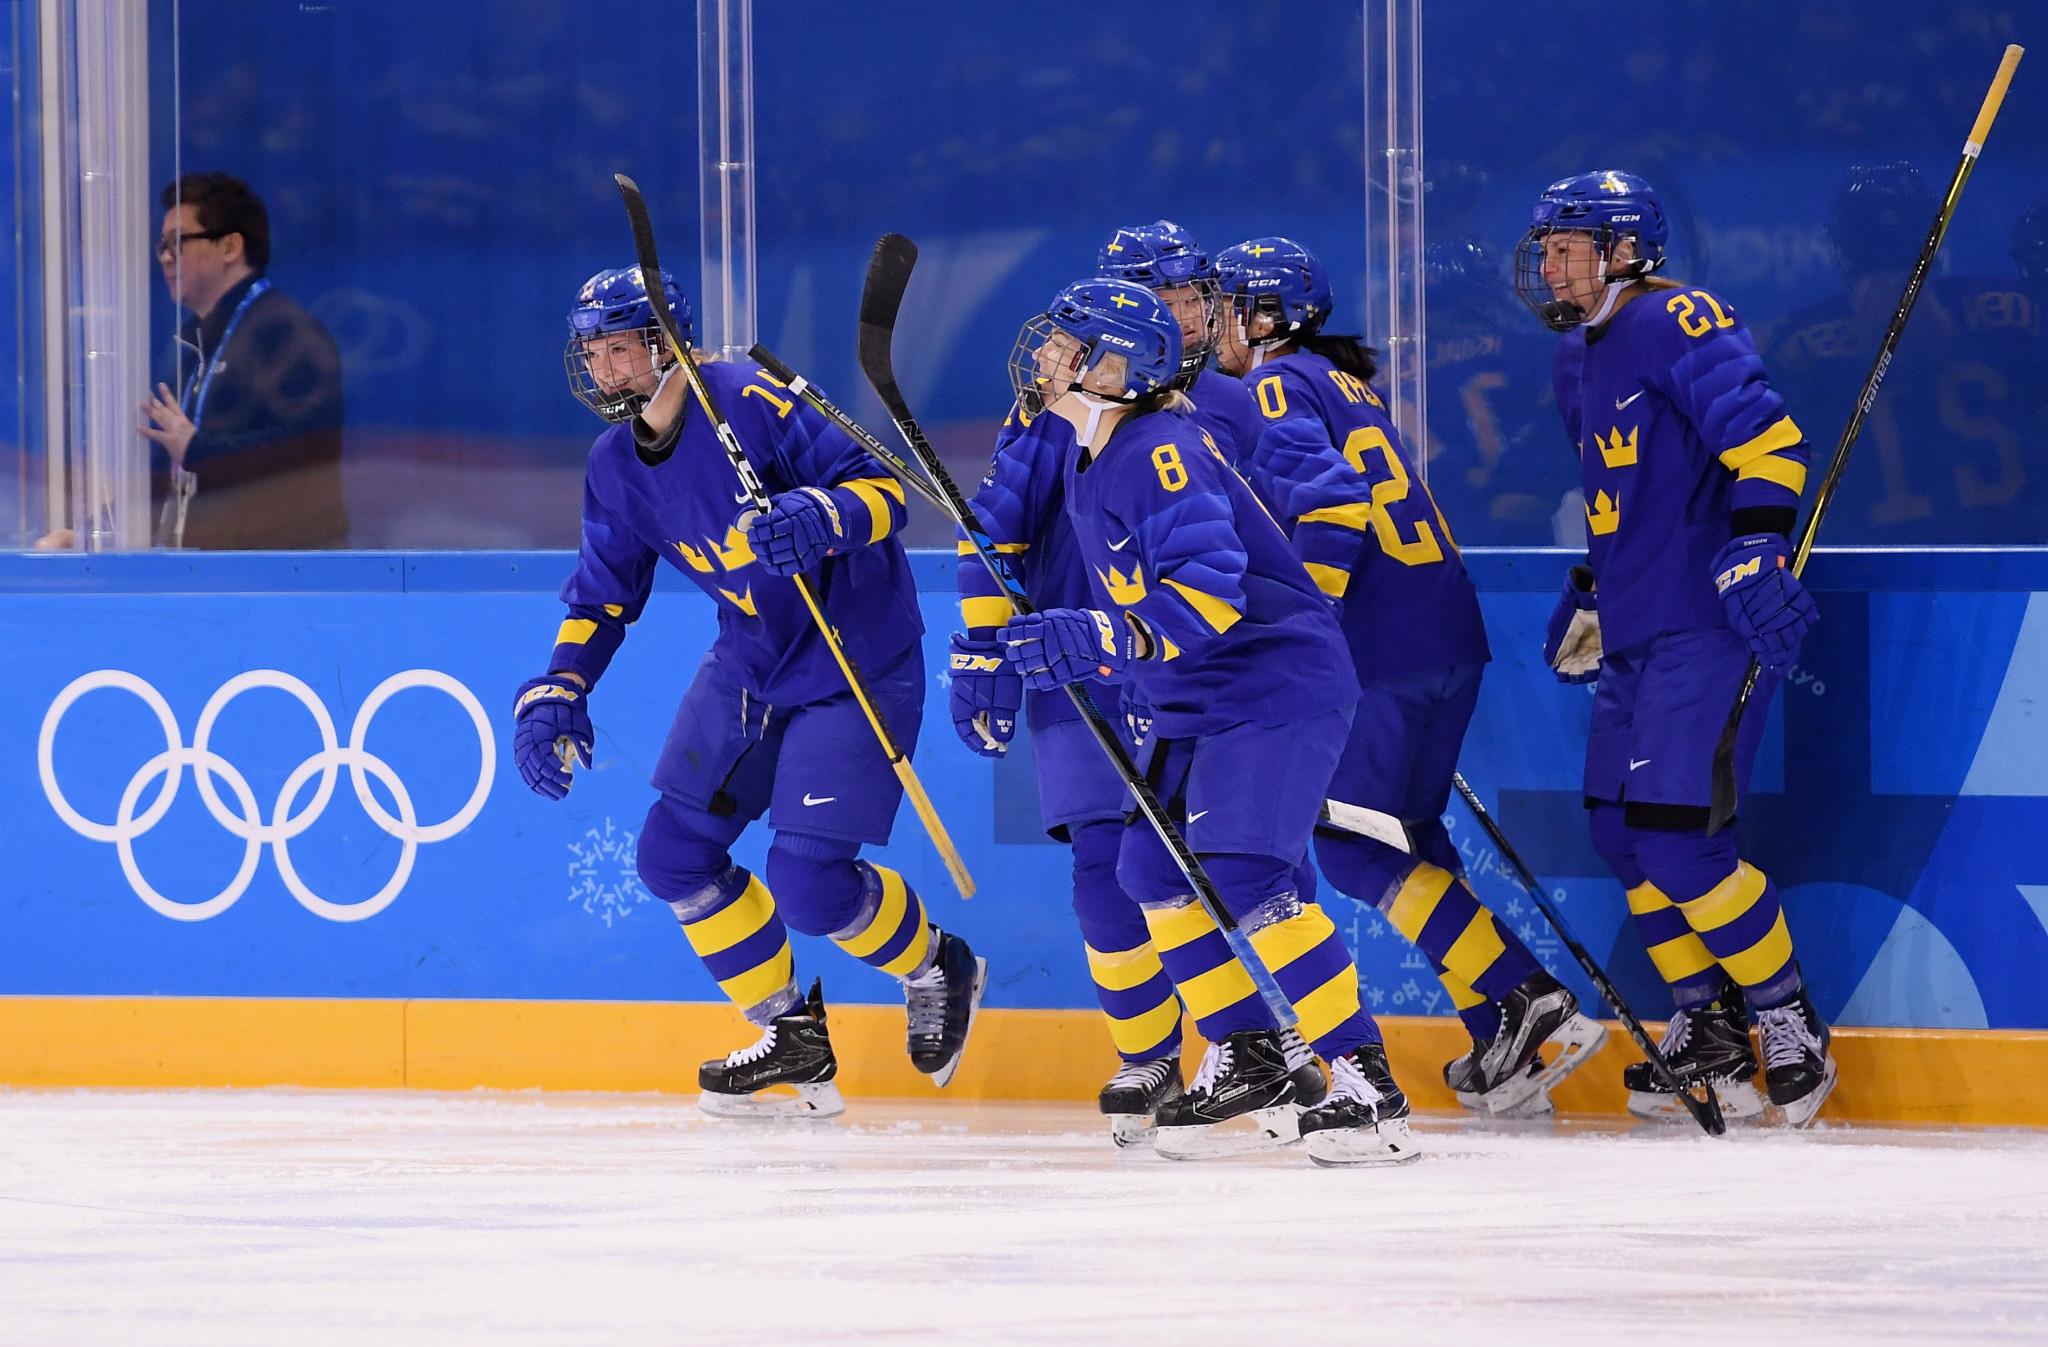 Sweden finished seventh in the women's ice hockey event at the Pyeongchang 2018 Winter Olympics ©Getty Images